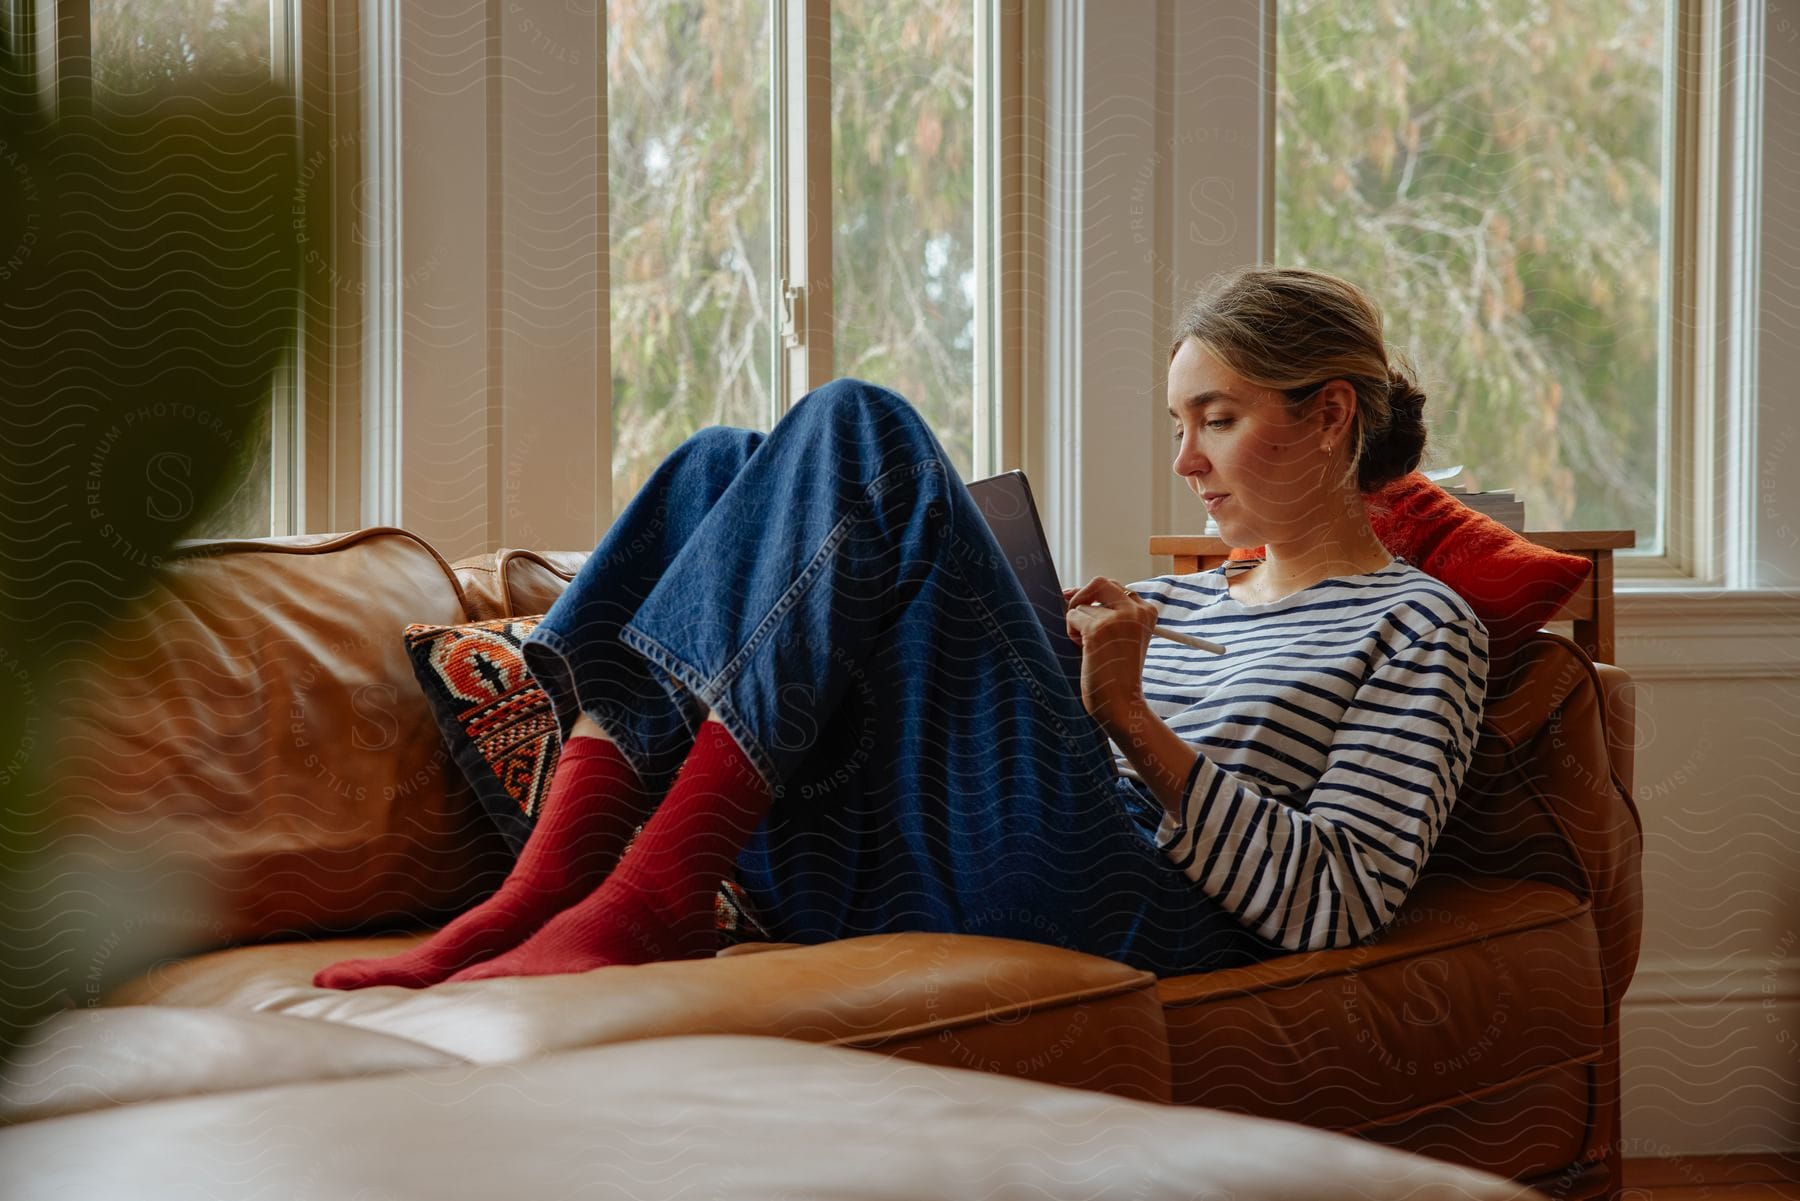 A woman is at home relaxing on a sofa while using a tablet during the day.